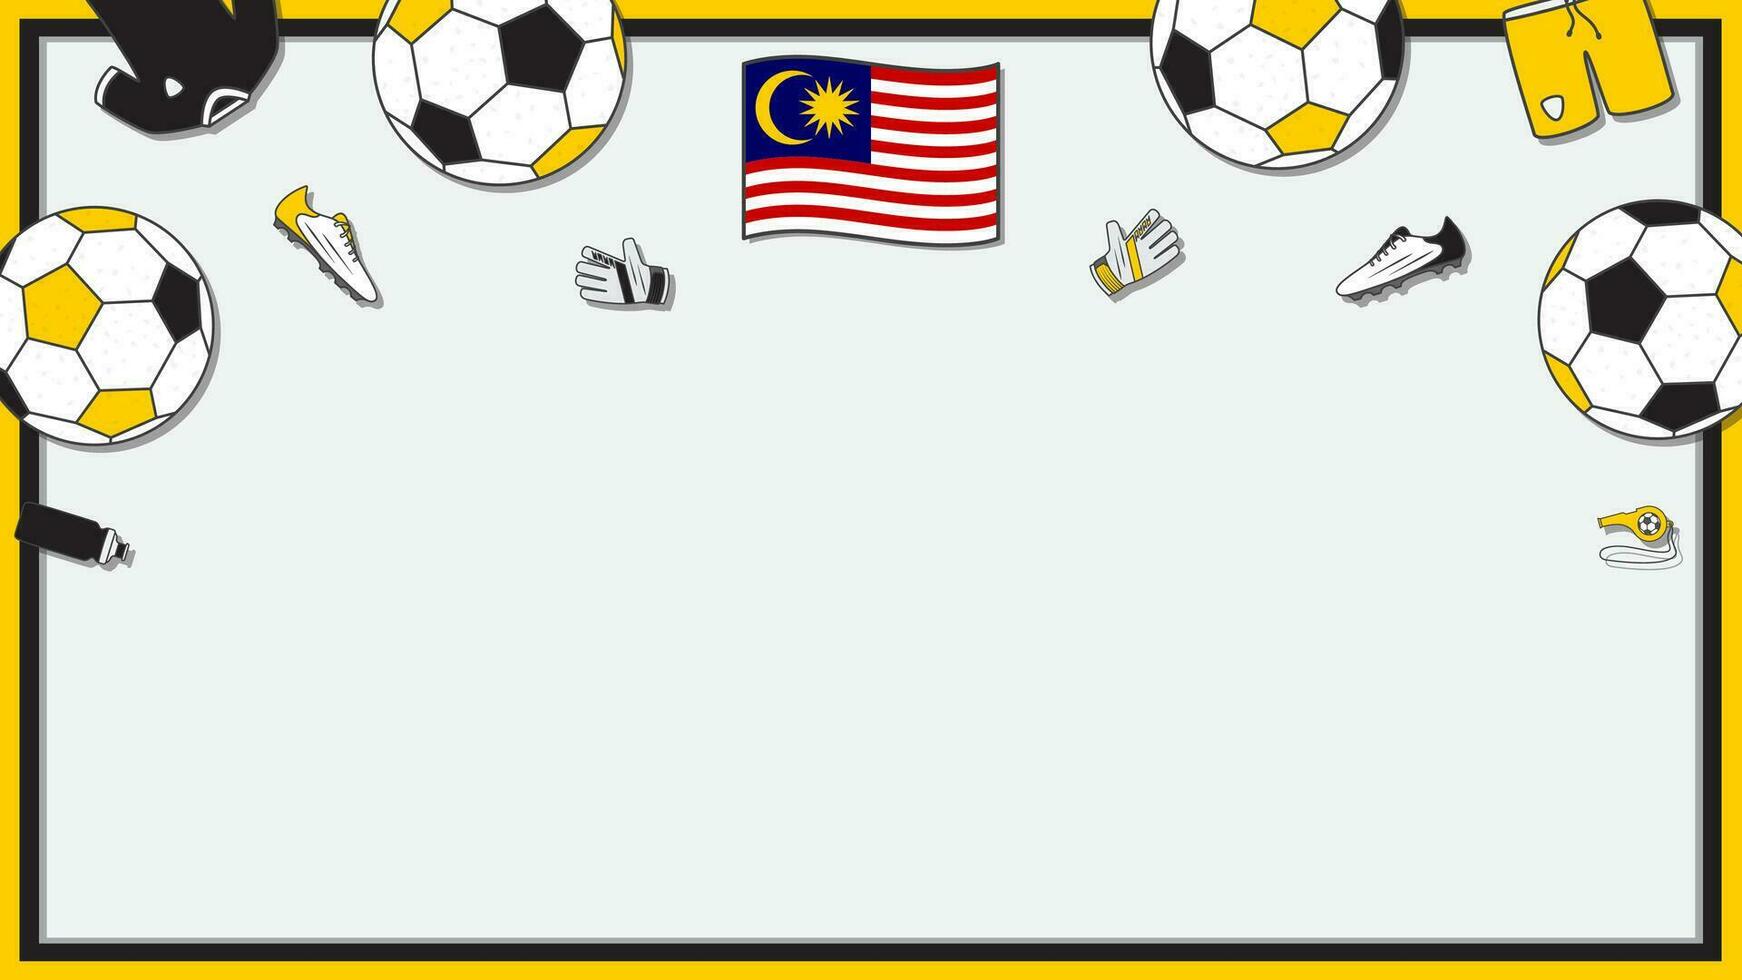 Football Background Design Template. Football Cartoon Vector Illustration. Competition In Malaysia